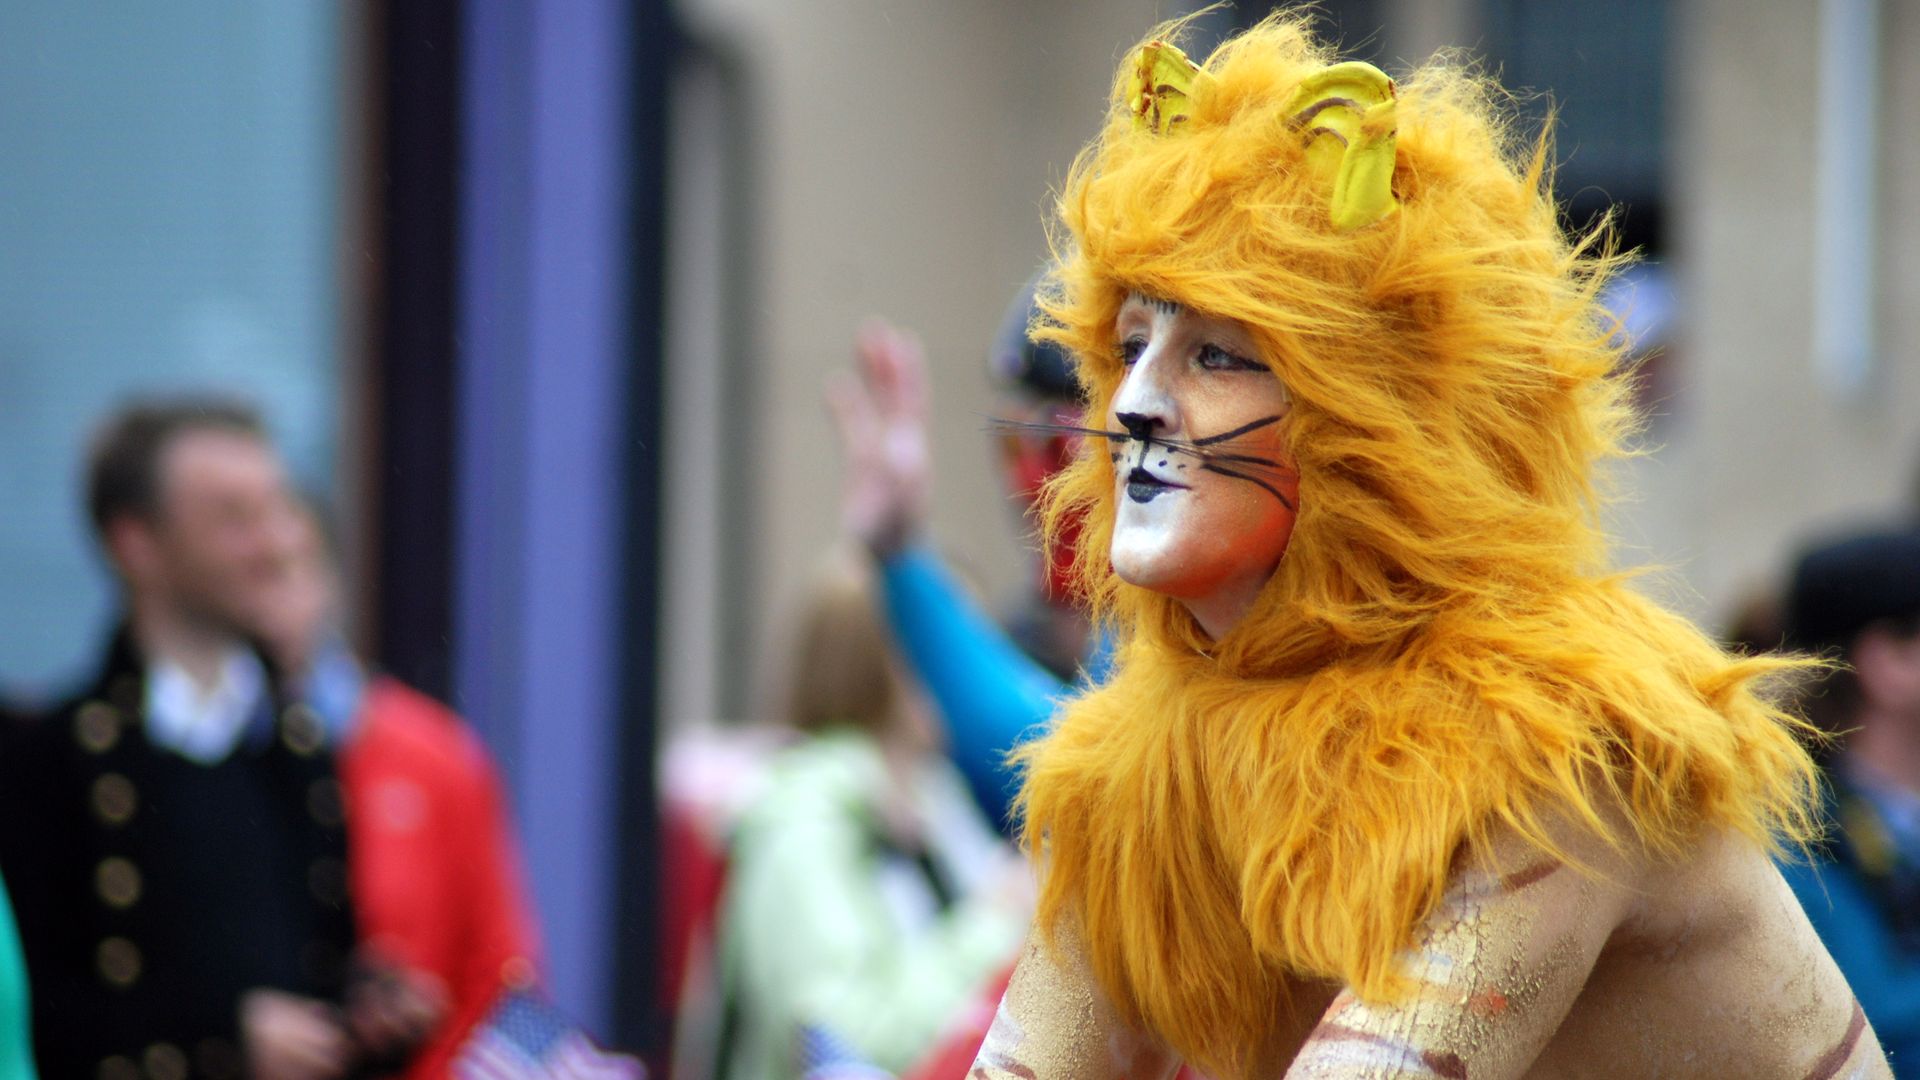 A main with his face painted like a lion with an orange mane rides a bike.